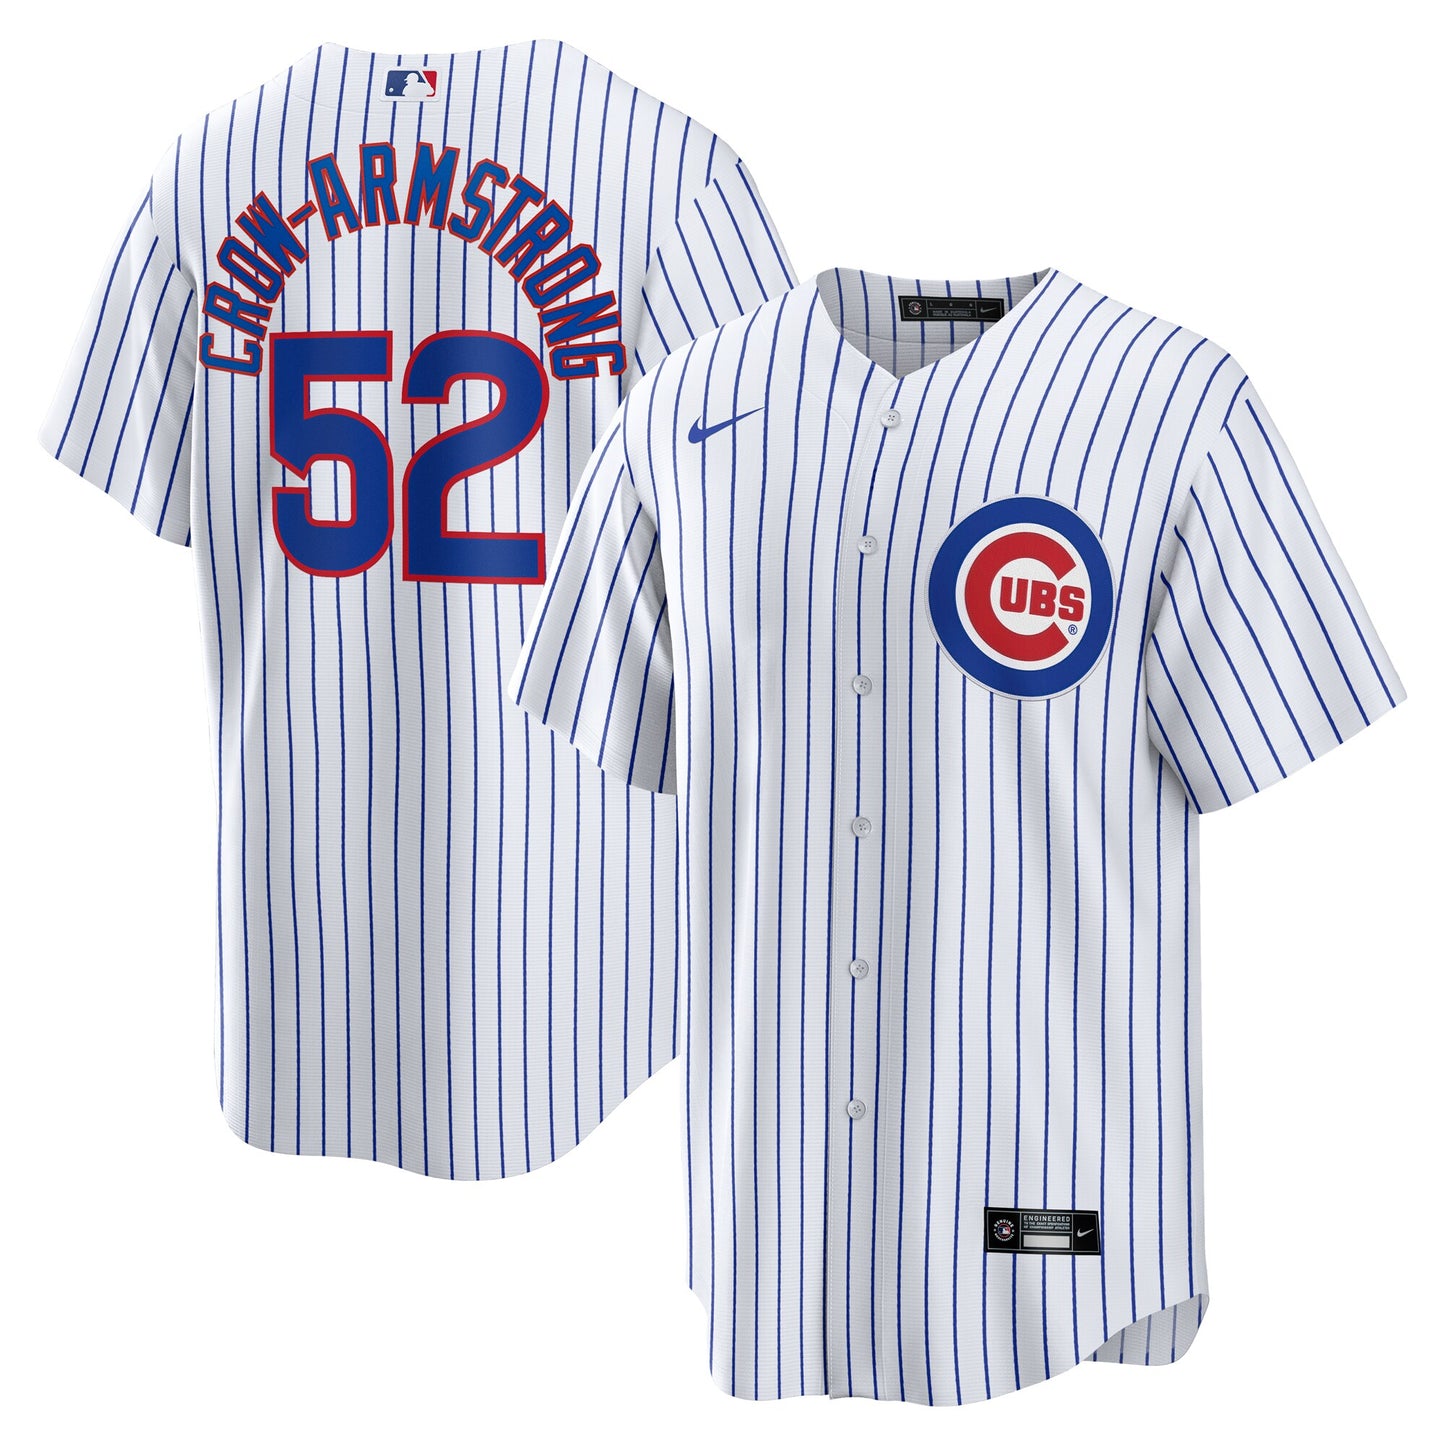 Pete Crow-Armstrong Chicago Cubs Nike Home Replica Player Jersey - White